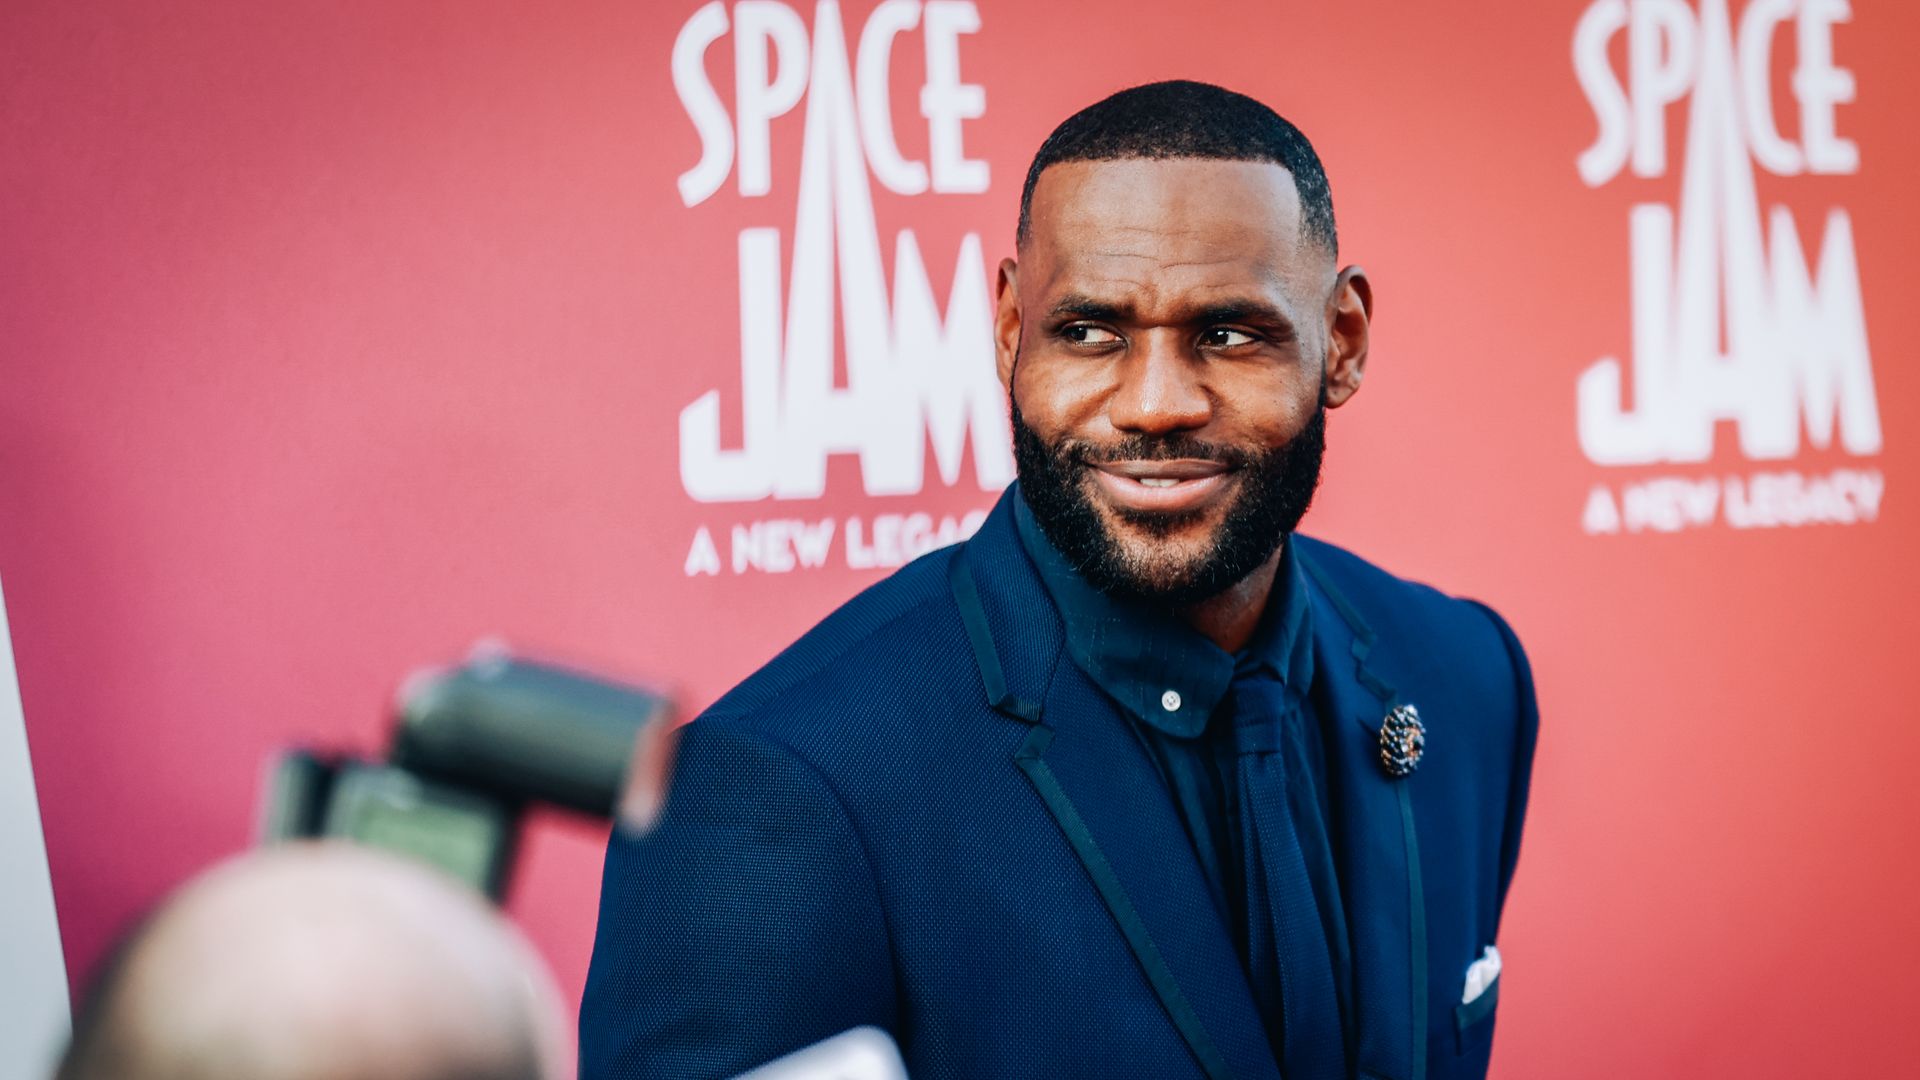 LeBron James attends the premiere of Warner Bros "Space Jam: A New Legacy" at Regal LA Live on July 12, 2021 in Los Angeles, California